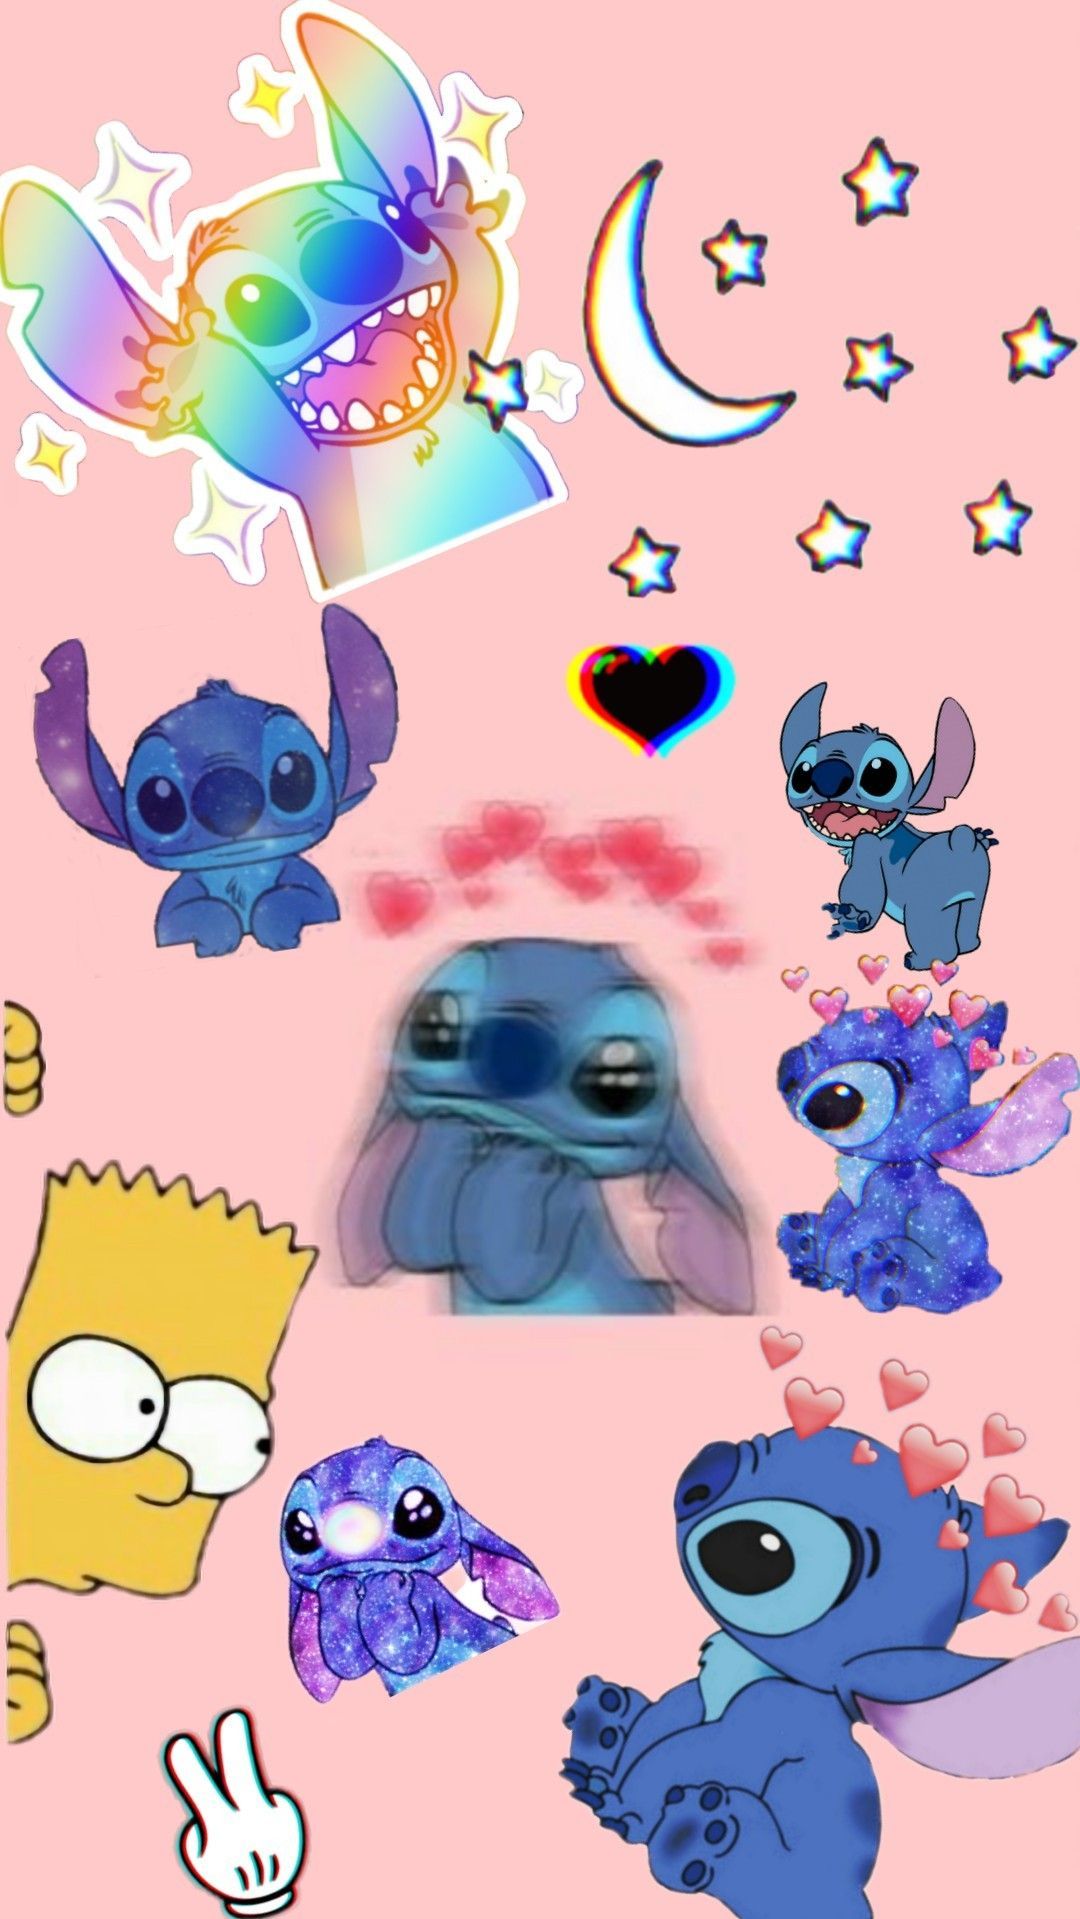 Stitch wallpaper for phone, aesthetic, lilo and stitch, the simpsons, phone background, phone wallpaper, cartoon, phone case, phone cover - Stitch